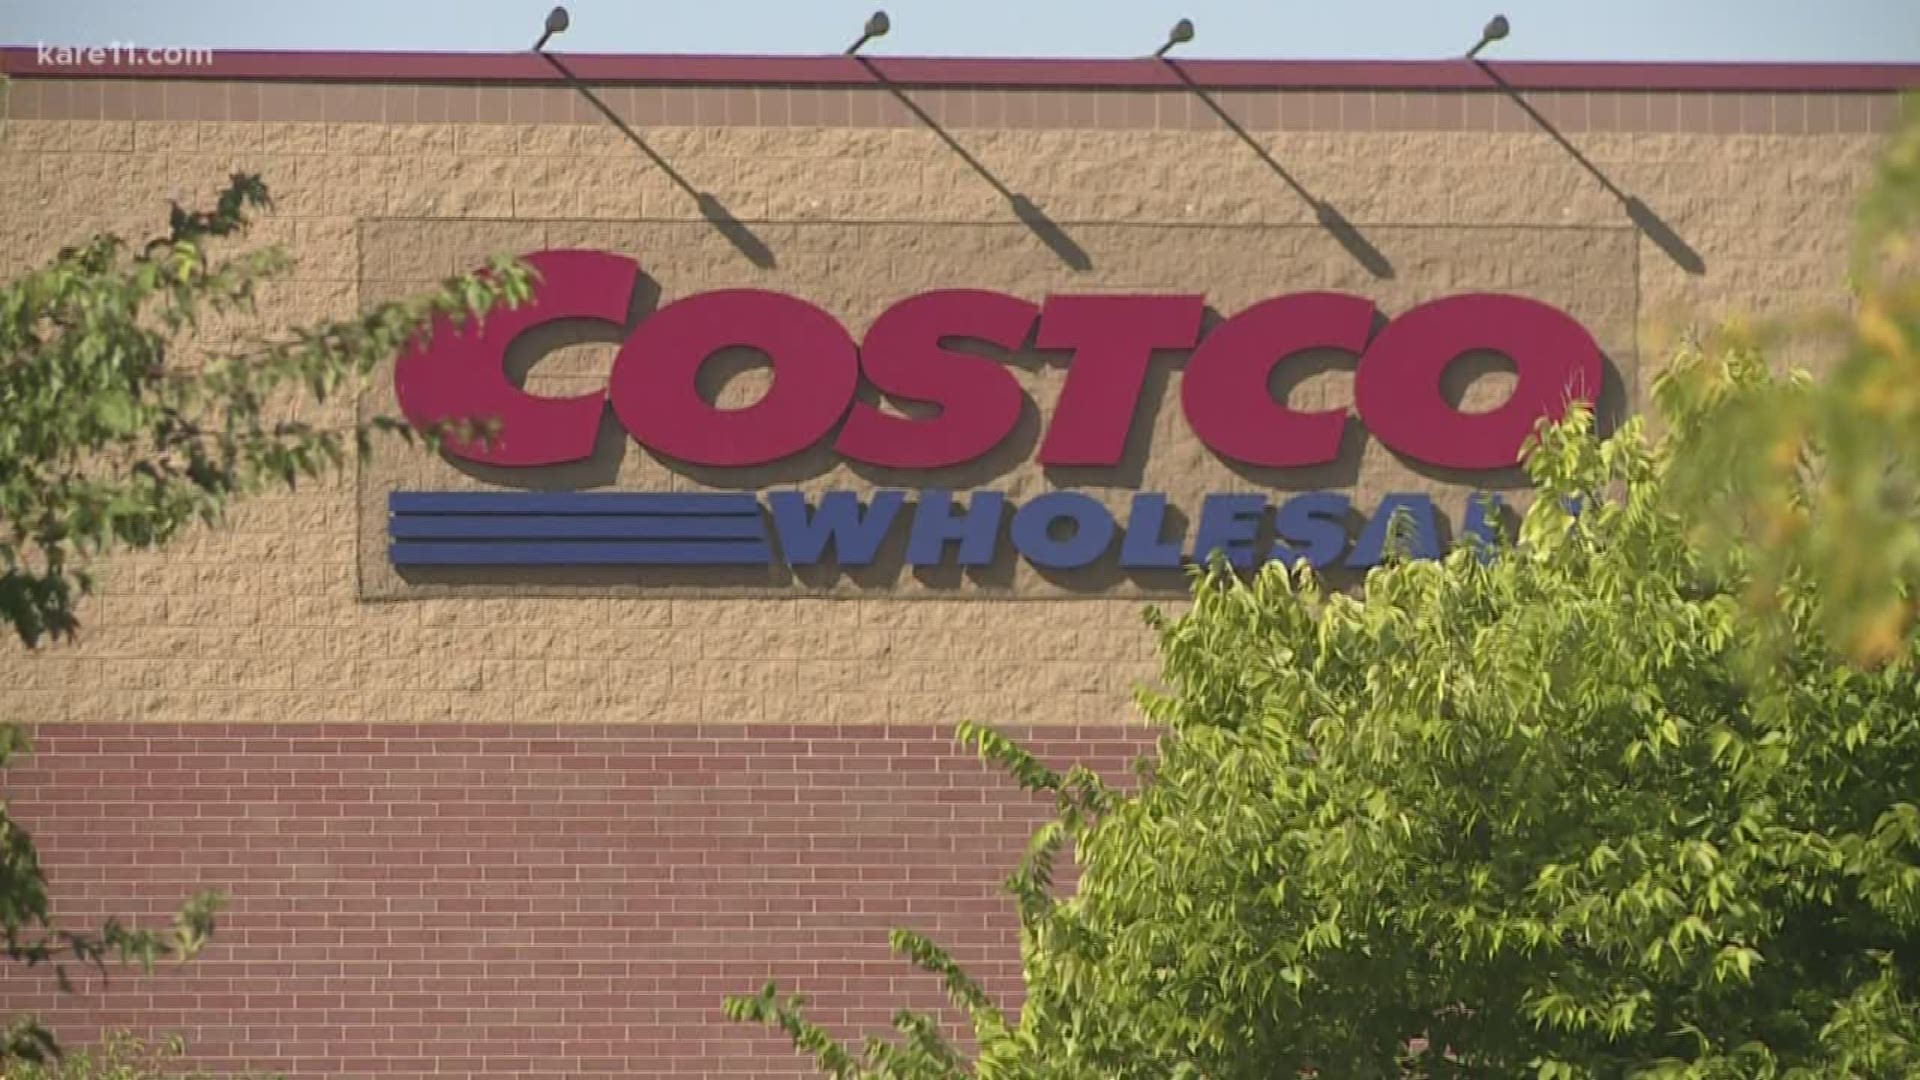 Costco is building a large distribution center on the western edge of Owatonna, Minn., an hour south of the Twin Cities. It will add 200 jobs to the region.